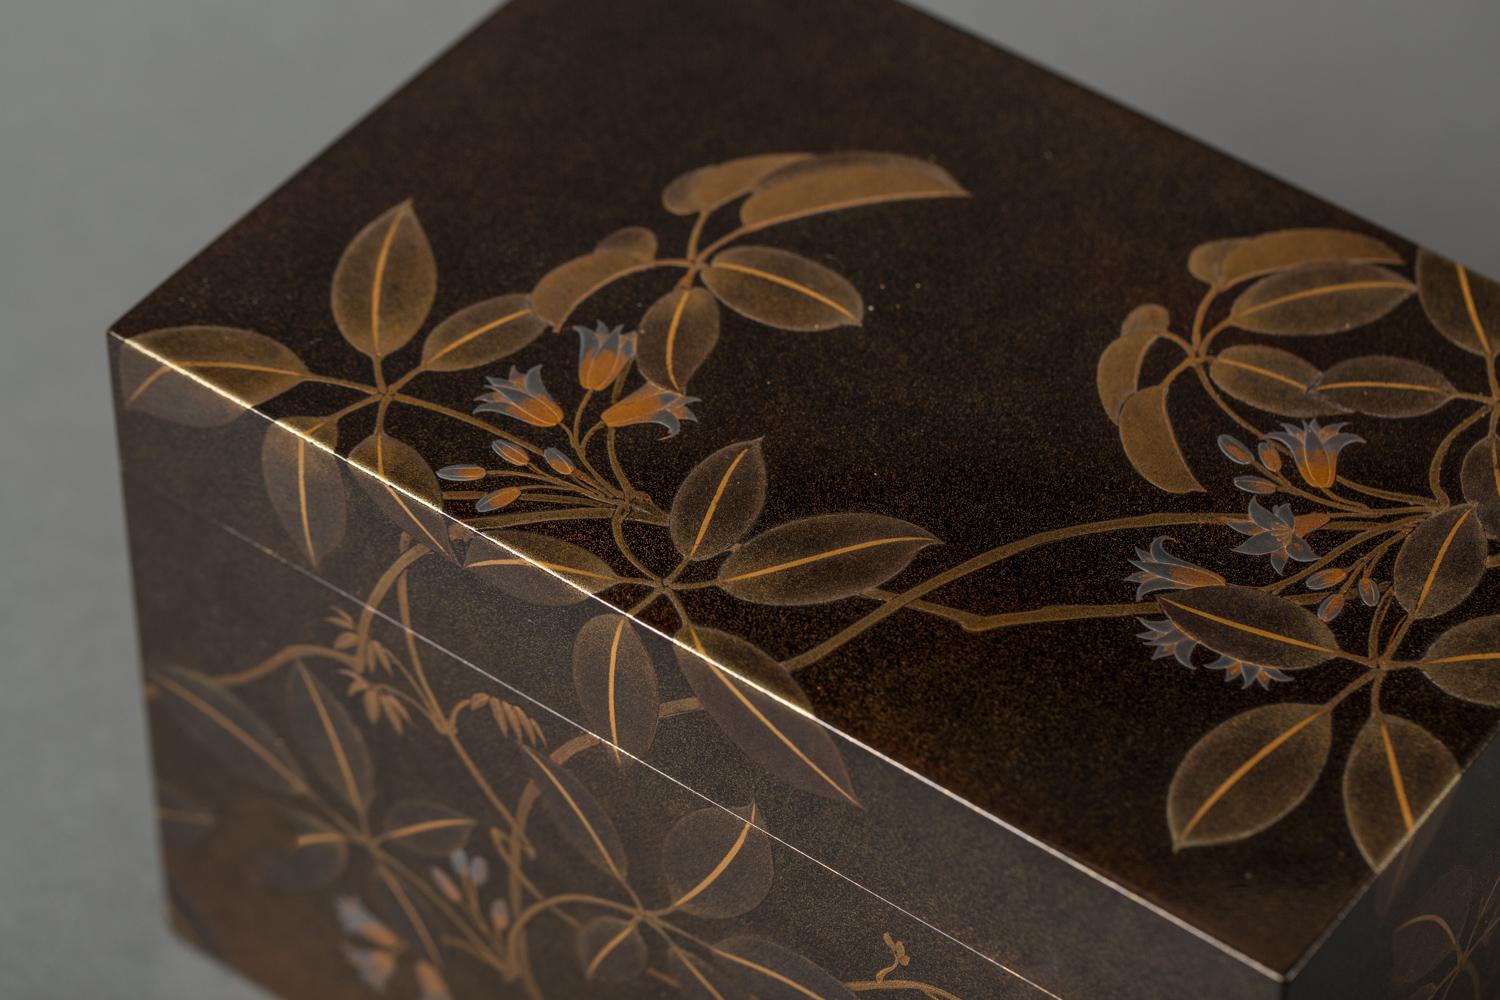 Japanese Lacquer Tea Box 'Chabako' with Flower Design For Sale 3